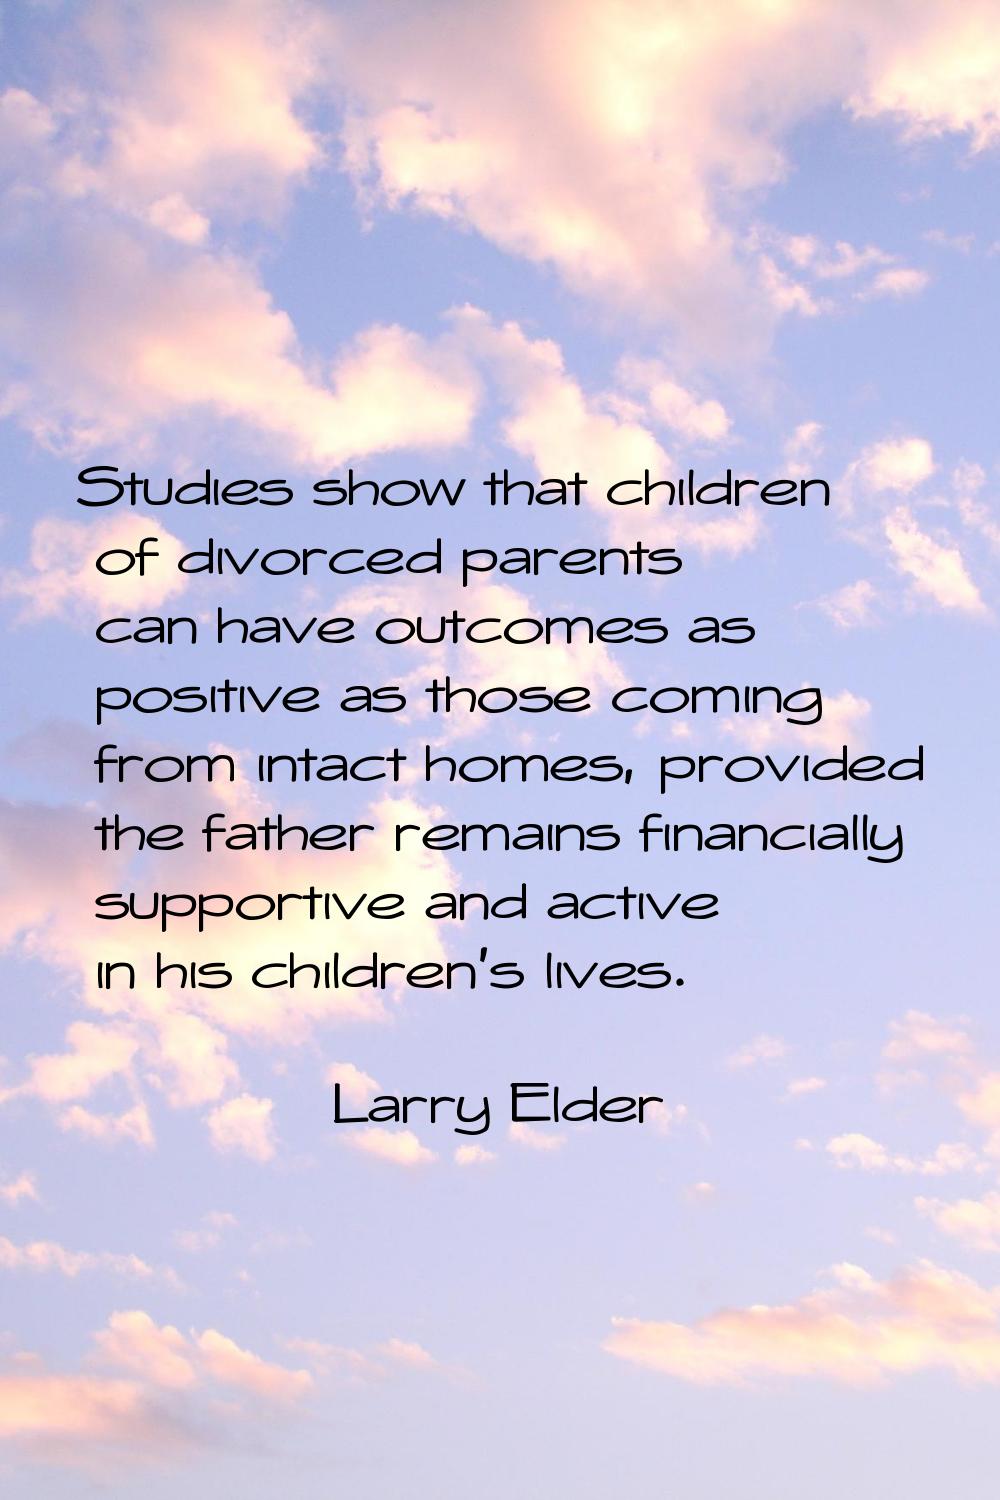 Studies show that children of divorced parents can have outcomes as positive as those coming from i